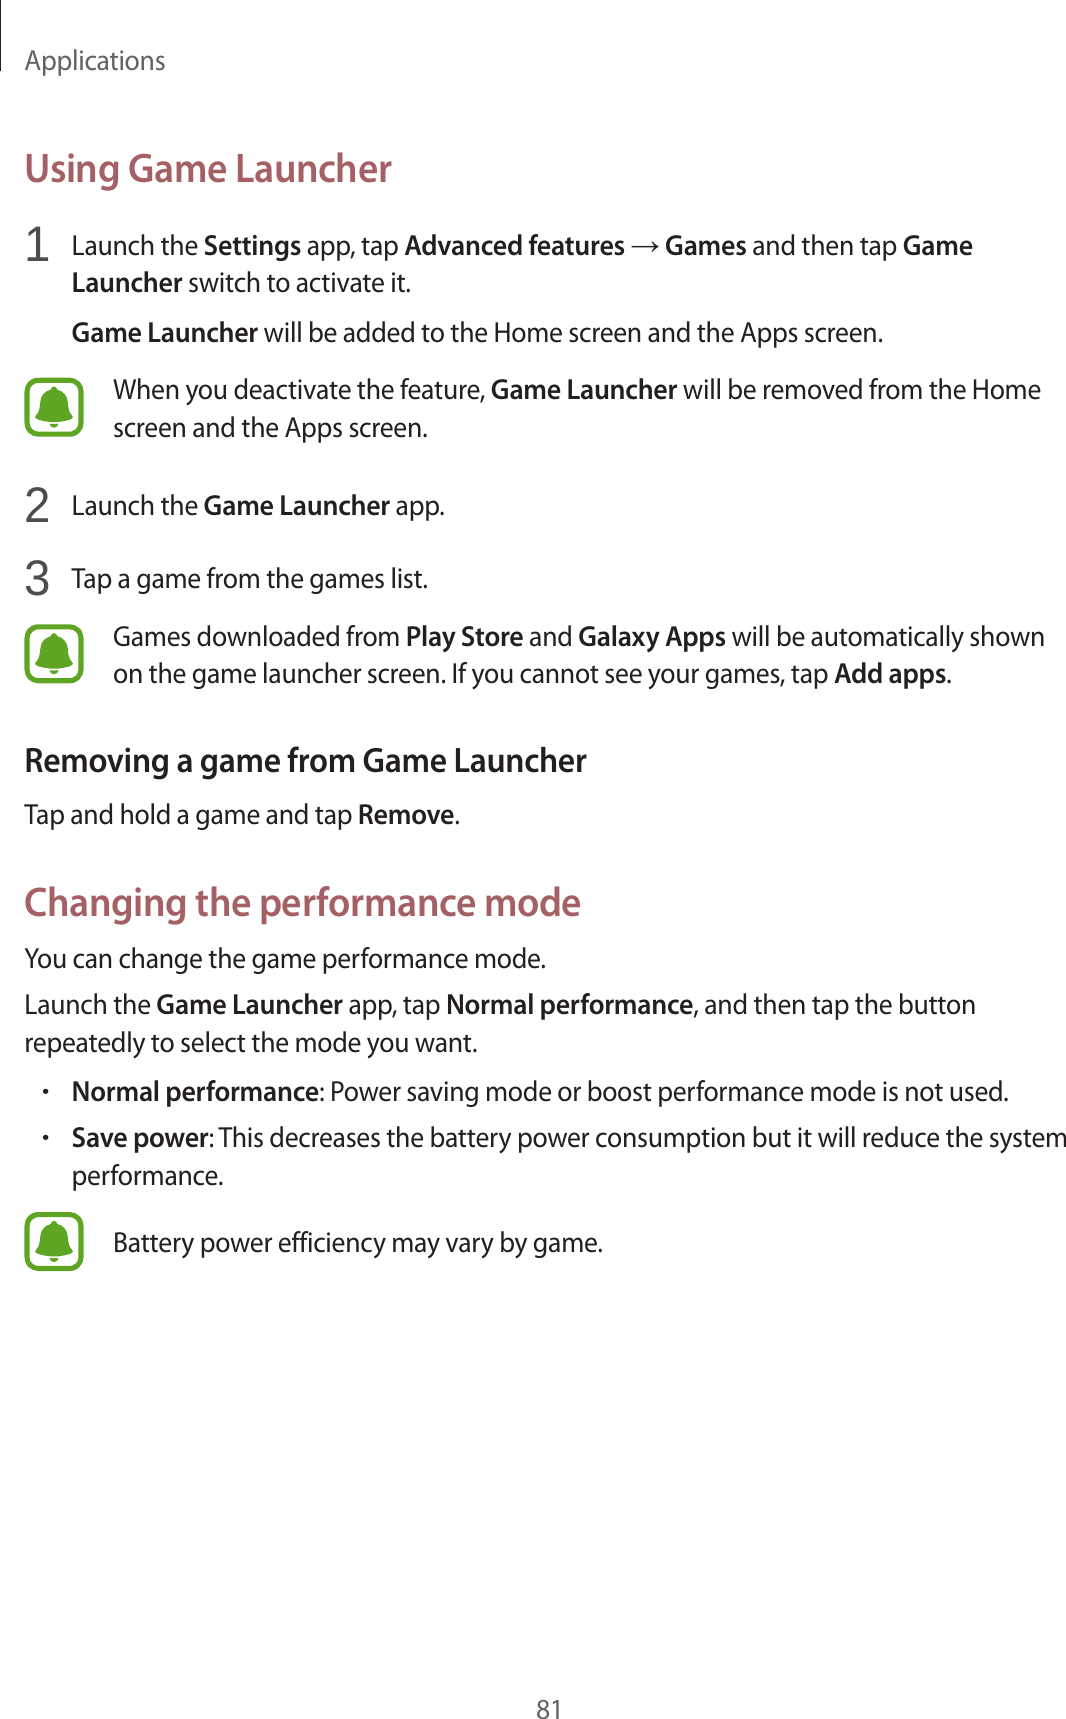 Applications81Using Game Launcher1  Launch the Settings app, tap Advanced features → Games and then tap Game Launcher switch to activate it.Game Launcher will be added to the Home screen and the Apps screen.When you deactivate the feature, Game Launcher will be removed from the Home screen and the Apps screen.2  Launch the Game Launcher app.3  Tap a game from the games list.Games downloaded from Play Store and Galaxy Apps will be automatically shown on the game launcher screen. If you cannot see your games, tap Add apps.Removing a game from Game LauncherTap and hold a game and tap Remove.Changing the performance modeYou can change the game performance mode.Launch the Game Launcher app, tap Normal performance, and then tap the button repeatedly to select the mode you want.•Normal performance: Power saving mode or boost performance mode is not used.•Save power: This decreases the battery power consumption but it will reduce the system performance.Battery power efficiency may vary by game.